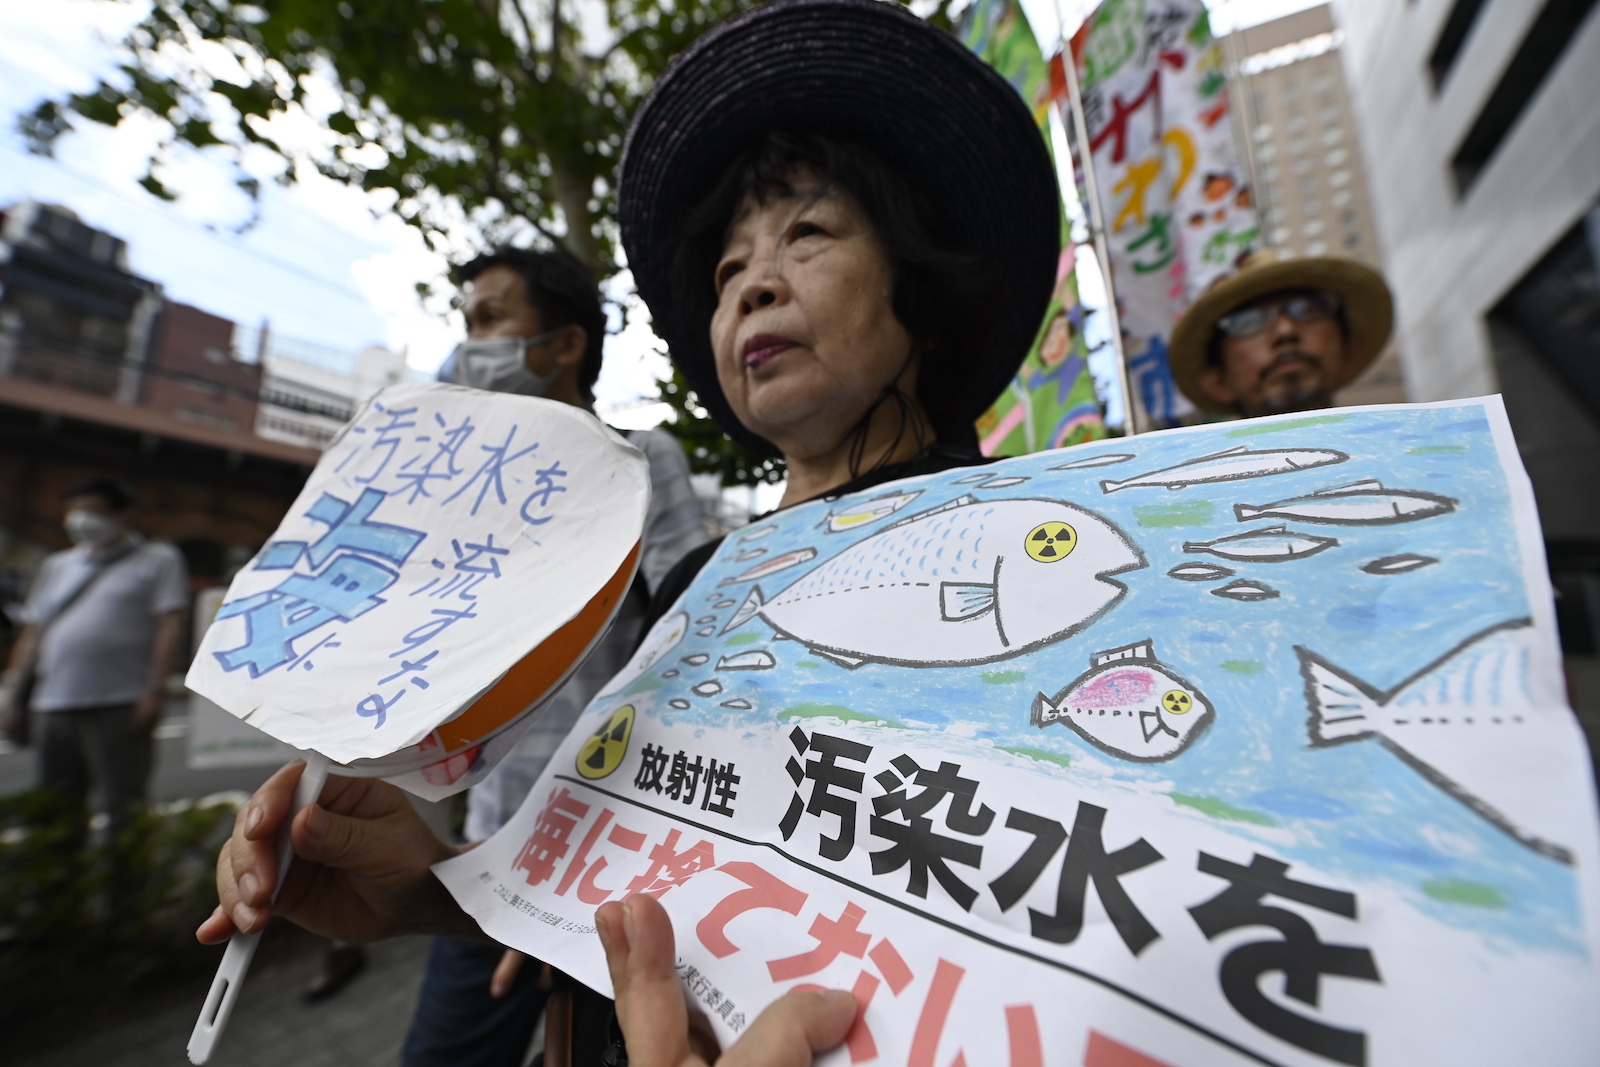 a woman stands amid a group of protesters. She is holding a sign with a drawing of a fish with nuclear symbol eyes